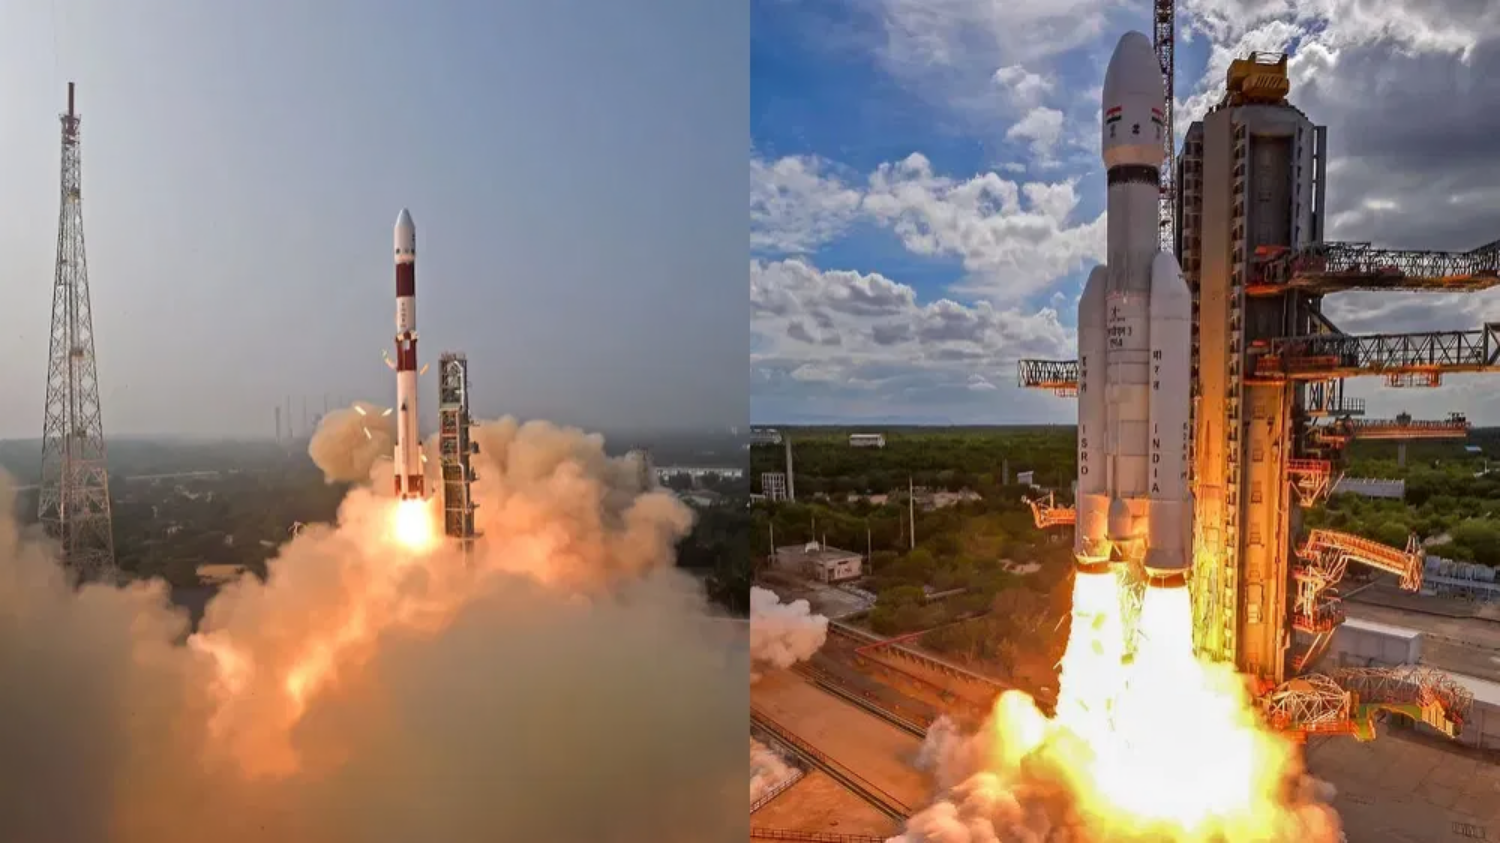 Prime Minister Modi will lay the foundation stone of ISRO's second 'launch pad', know what is special की तस्वीर